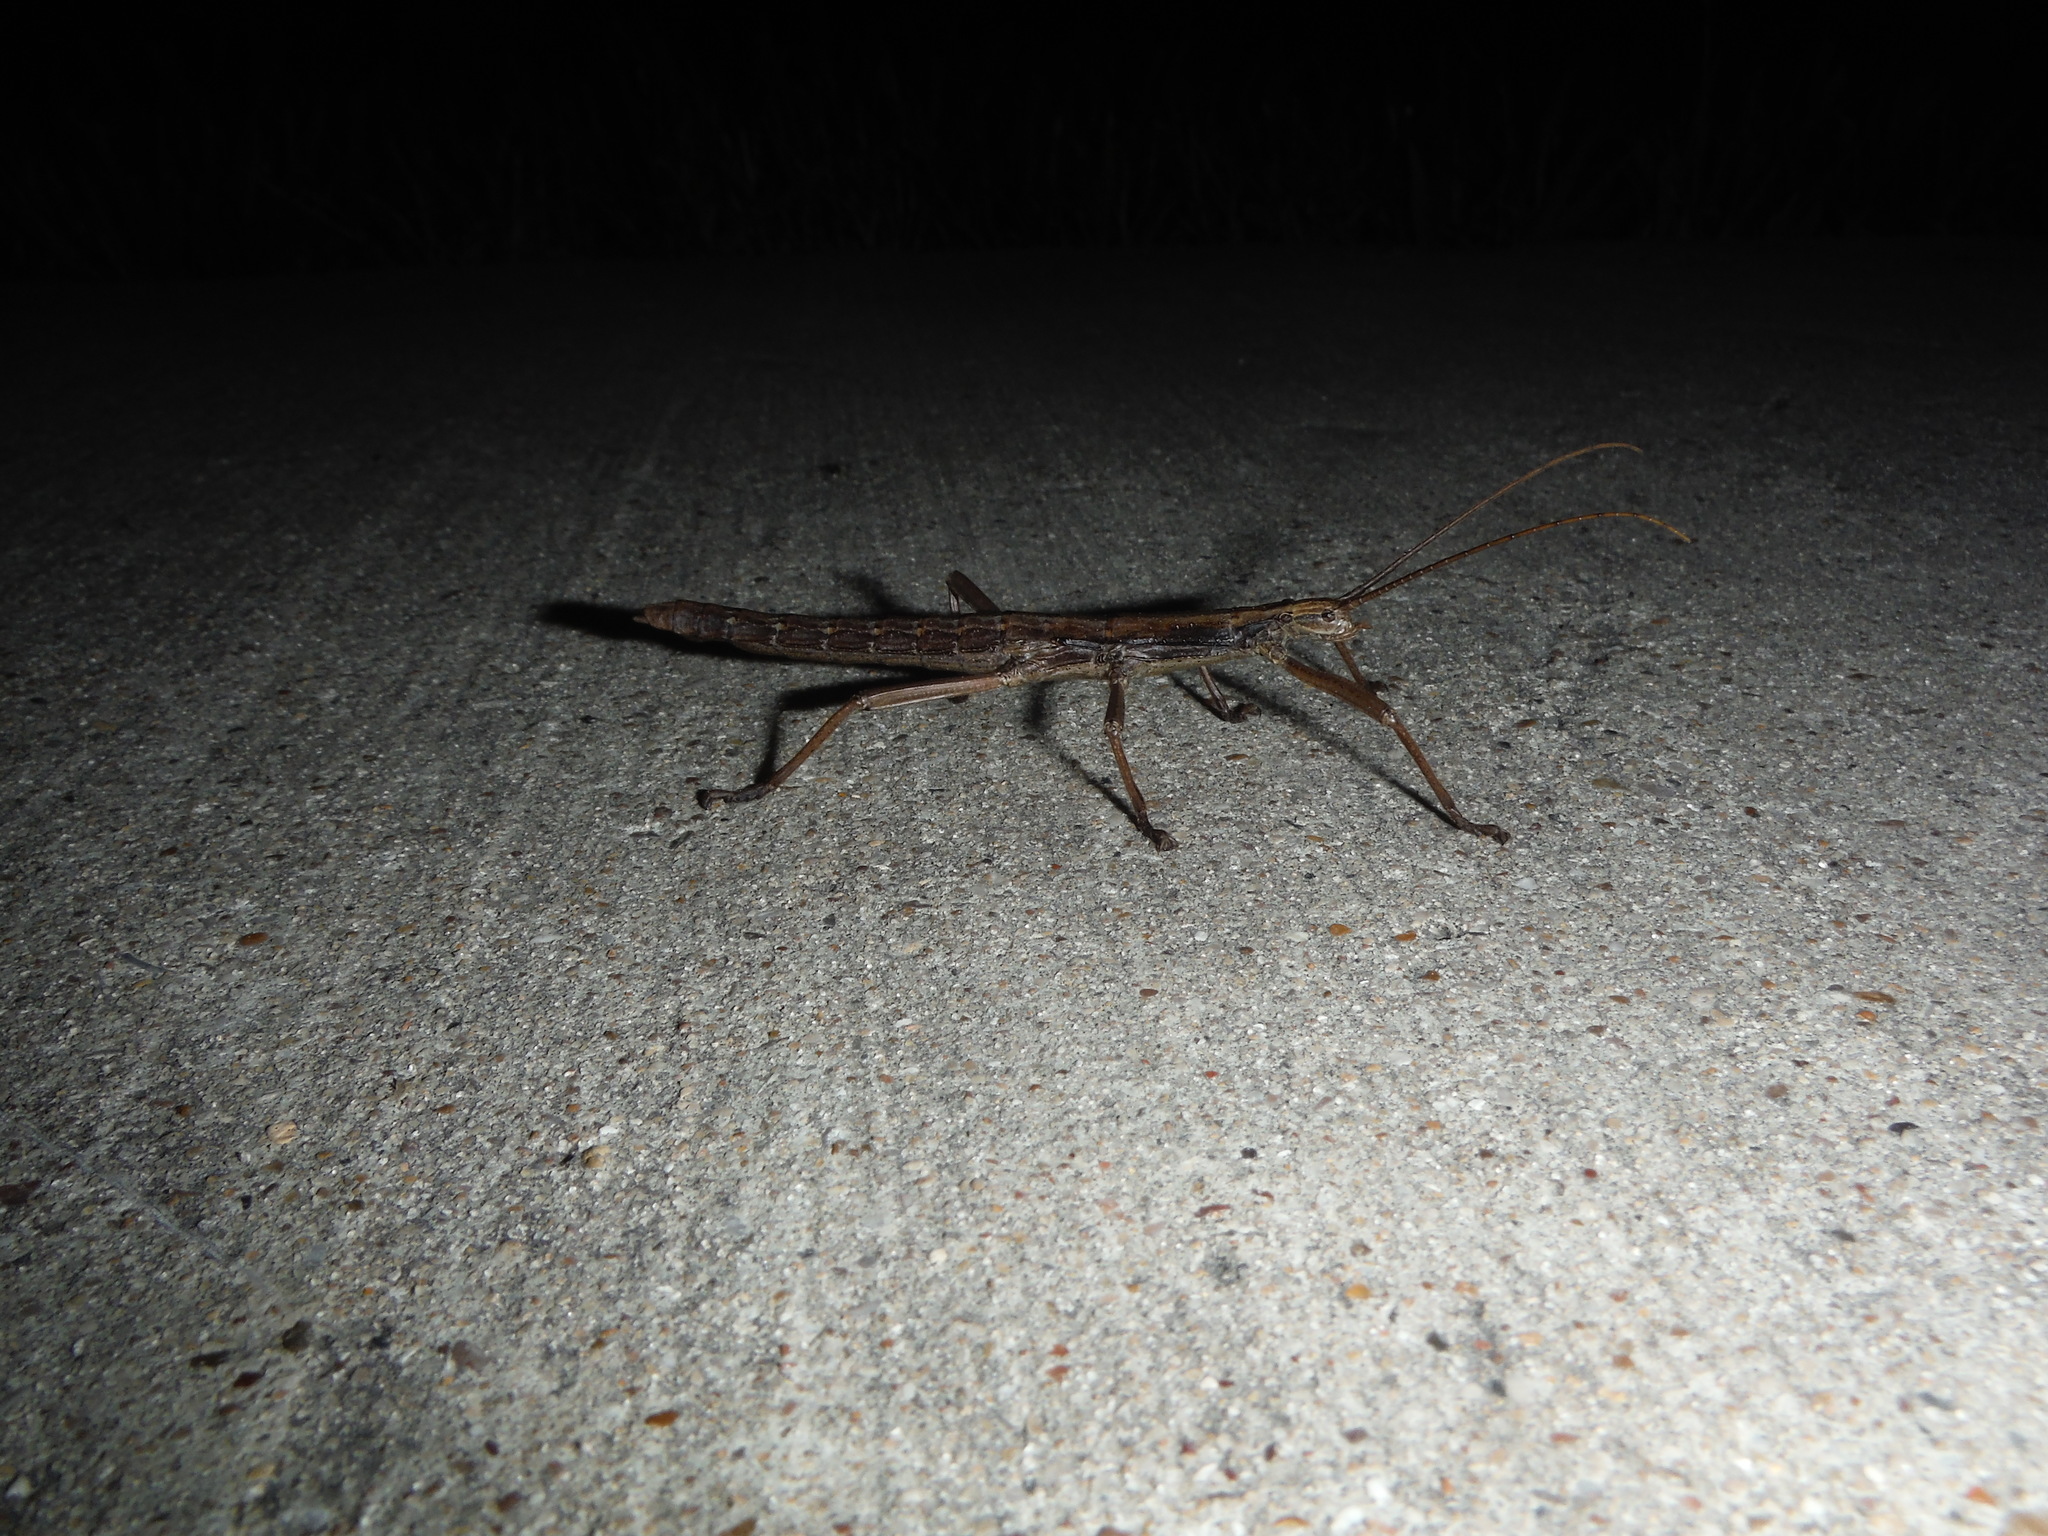 Image of Southern Two-striped Walkingstick